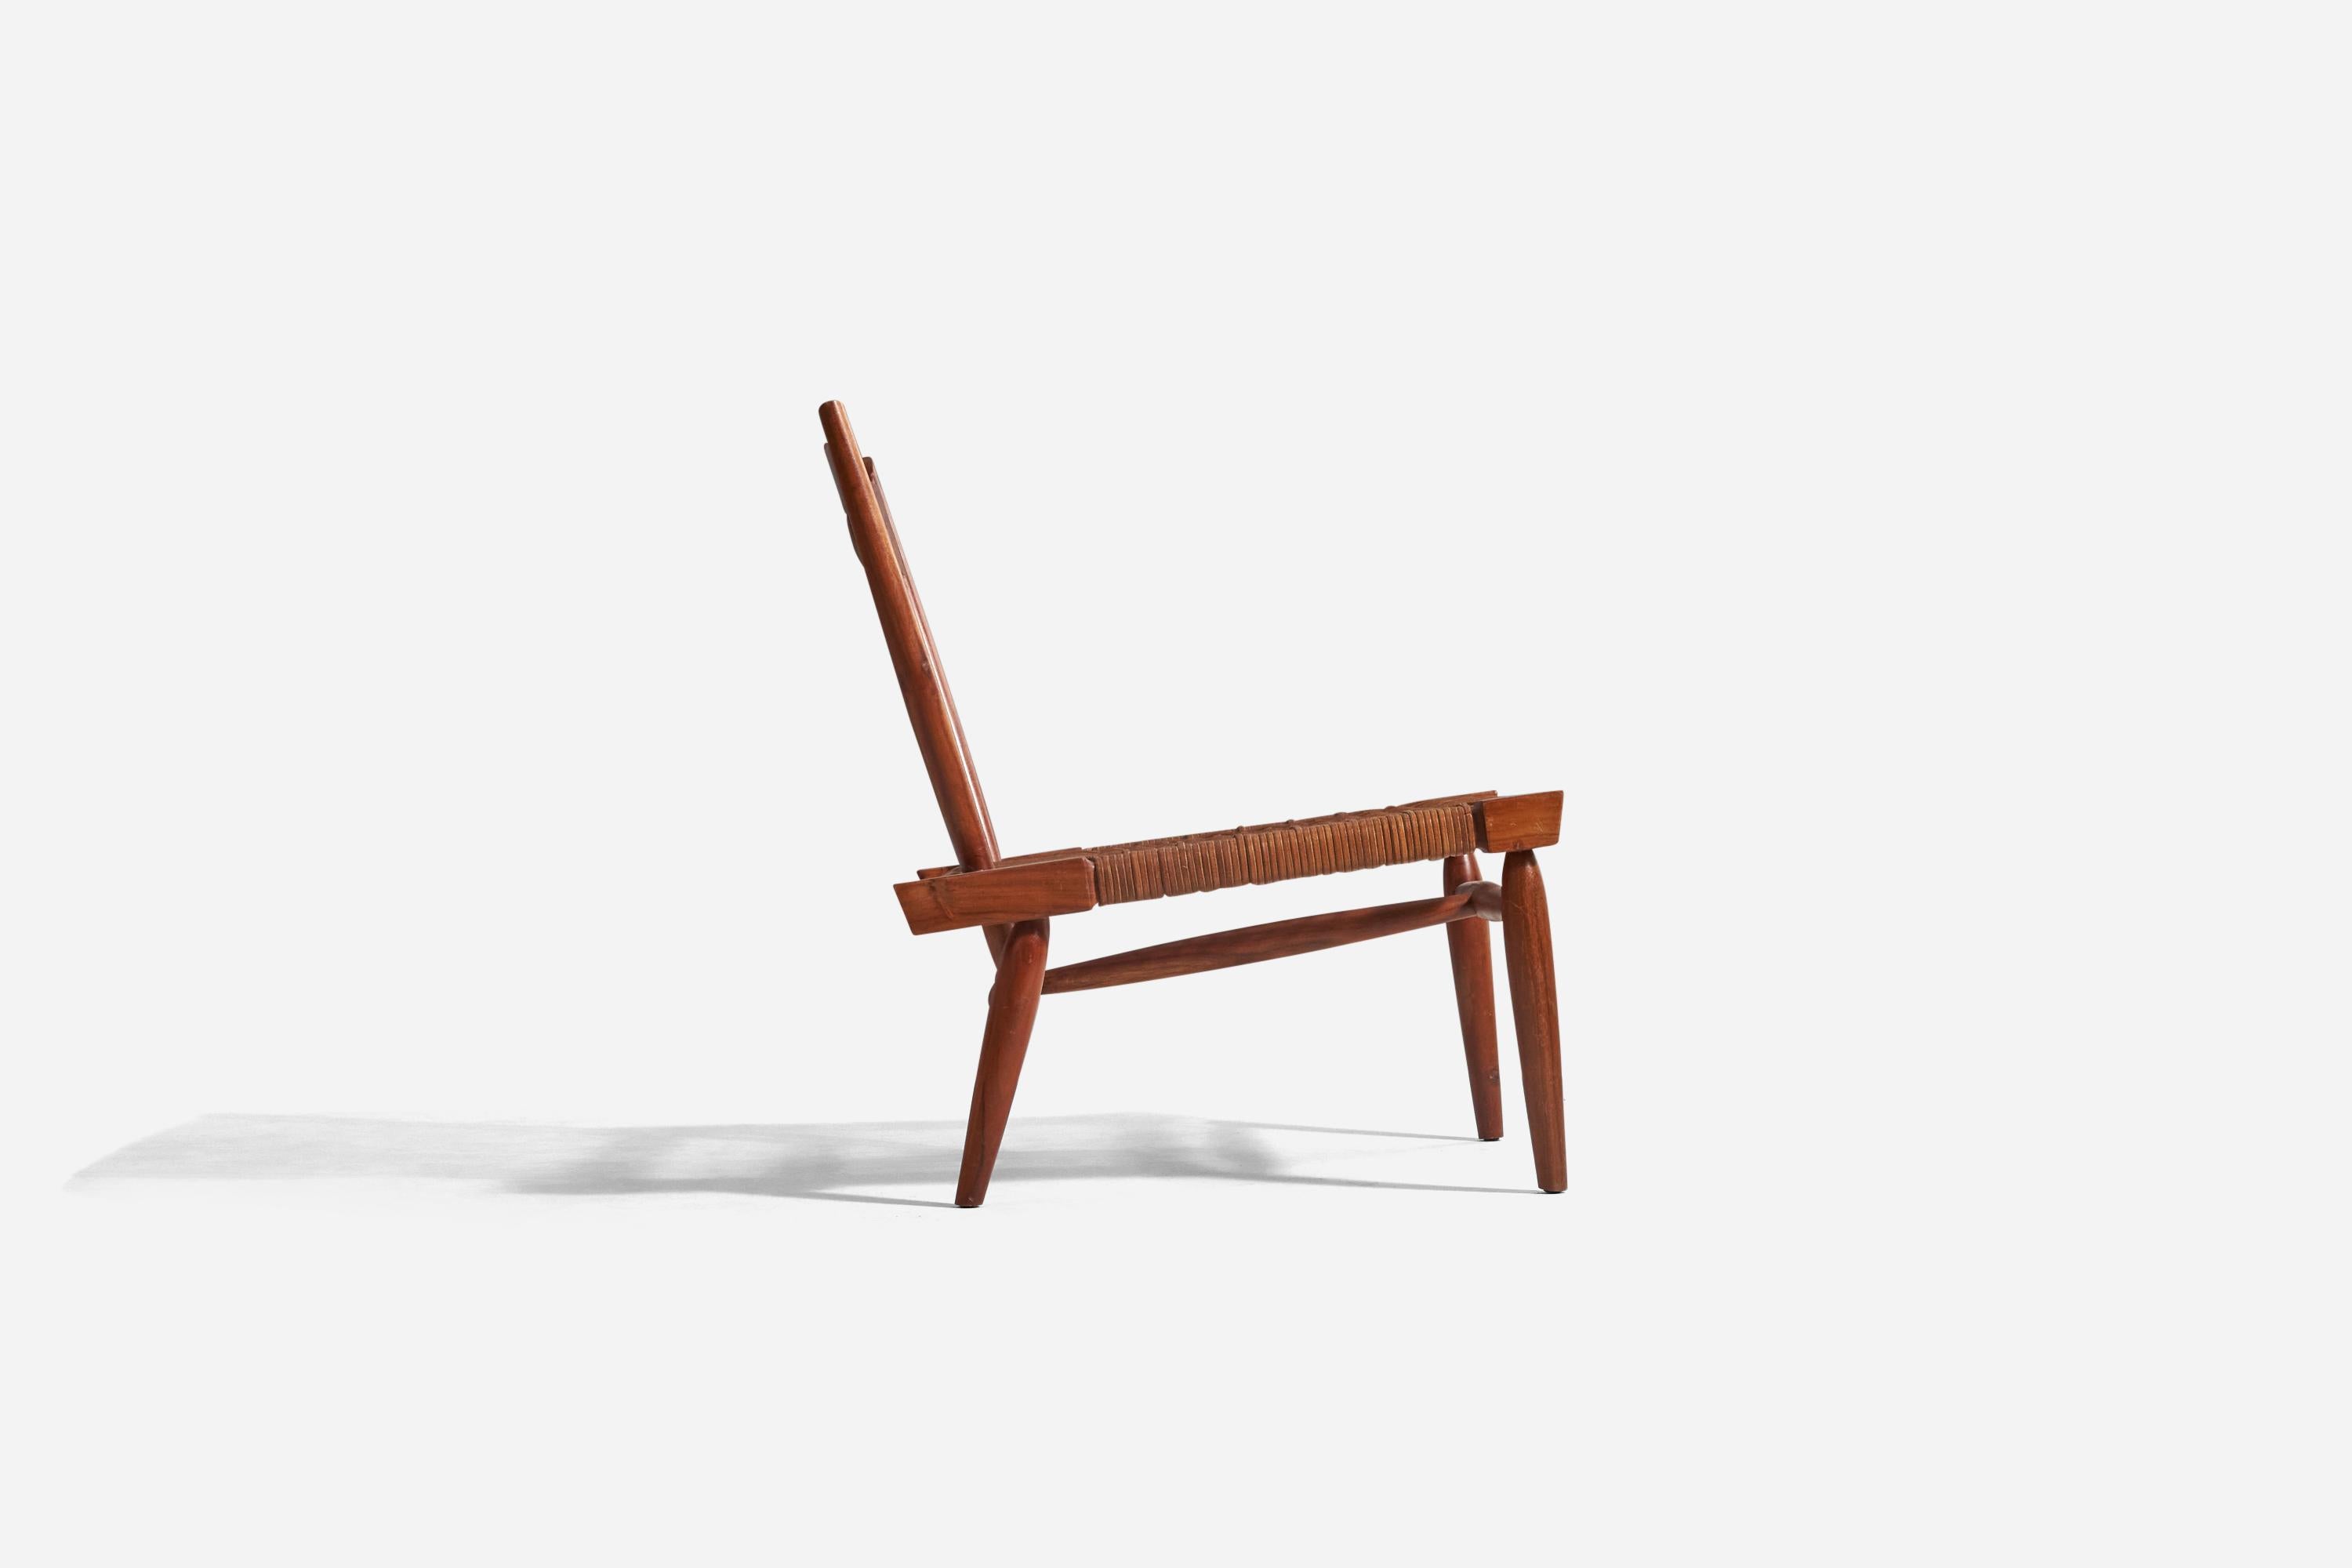 Mid-20th Century American Designer, Lounge Chair, Walnut, Cane, United States, 1960s For Sale